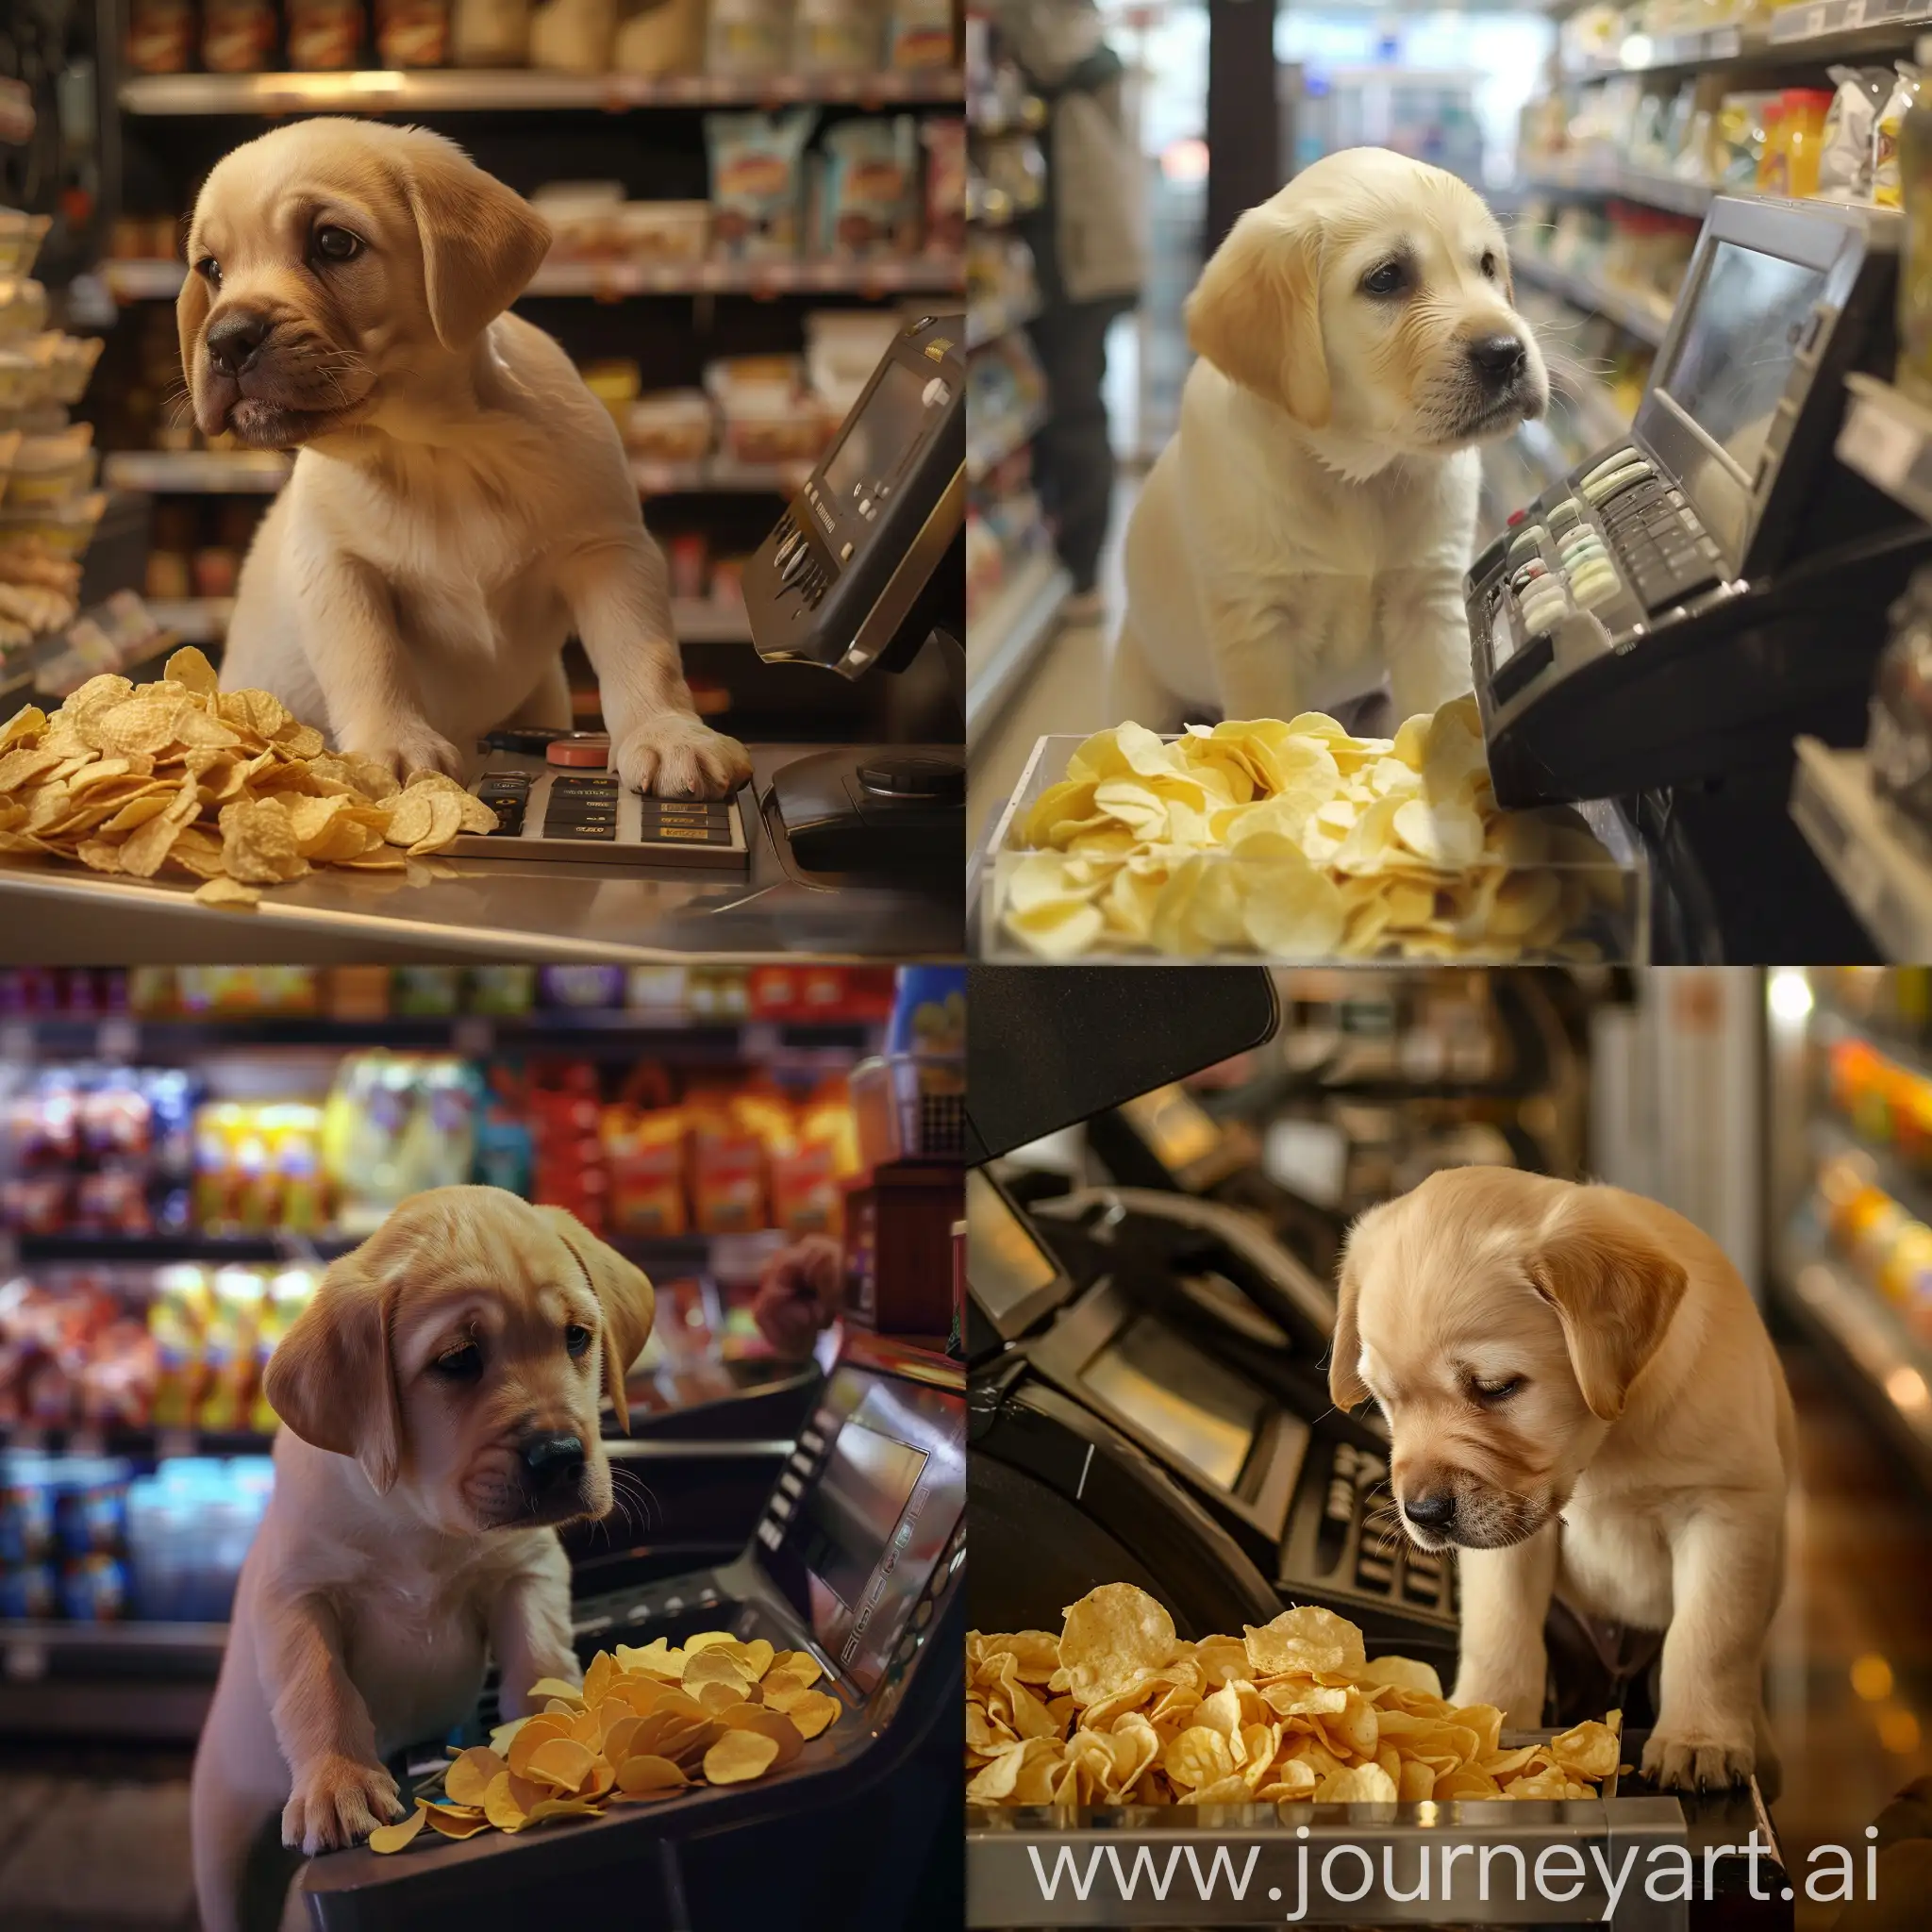 Yellow-Puppy-Crying-at-Store-Cash-Register-Without-Money-for-Chips